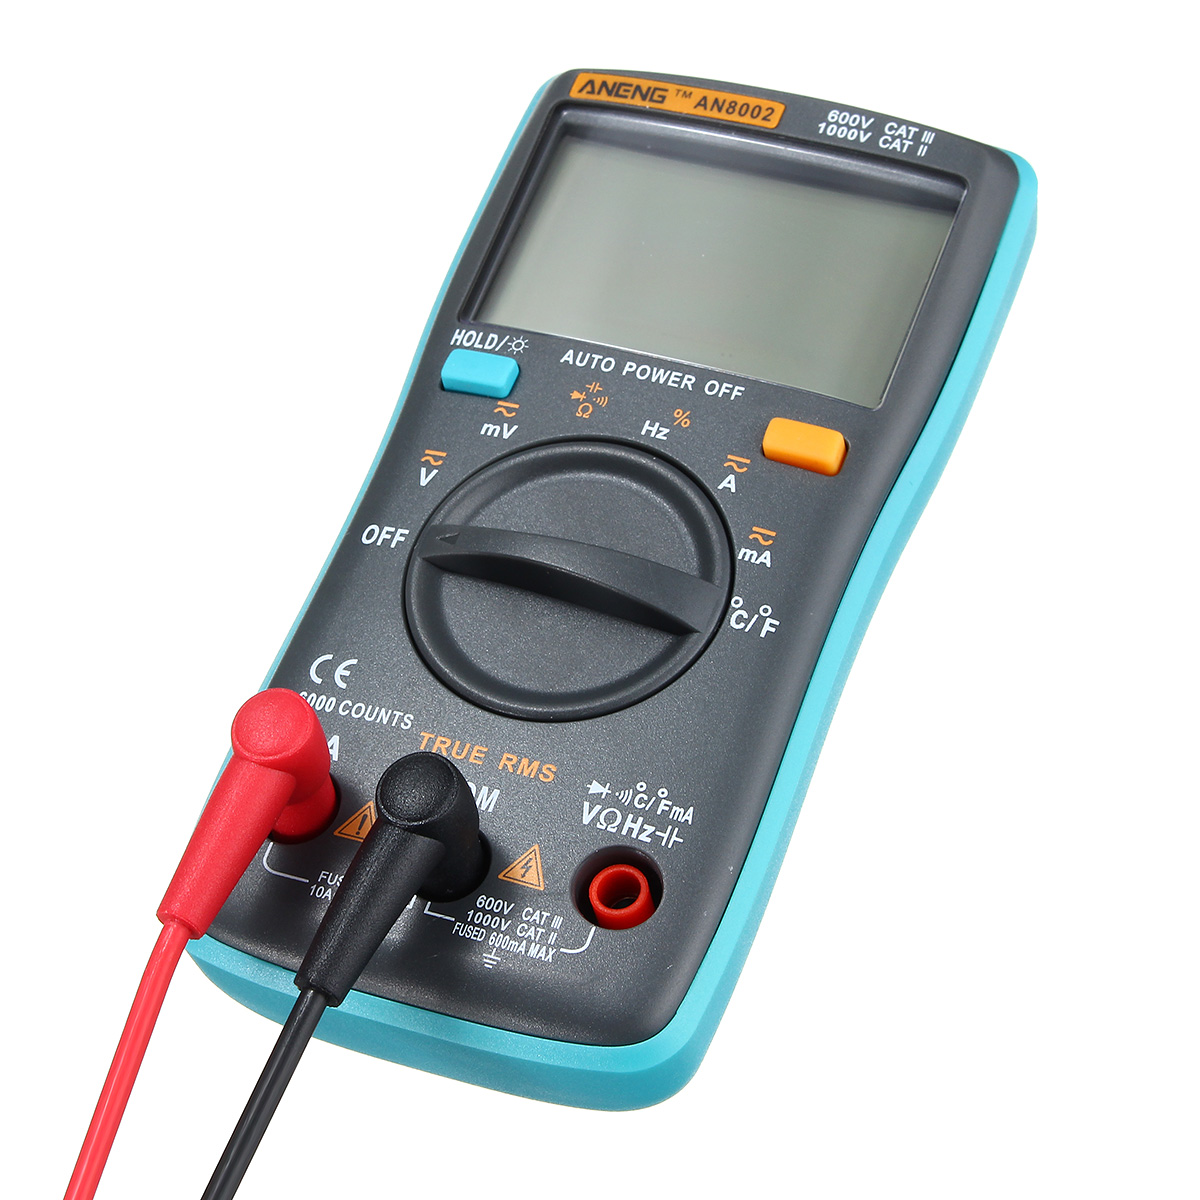 ANENG AN8002 Digital True RMS 6000 Counts Multimeter AC/DC Current Voltage Frequency Resistance Temperature Tester ℃/℉ 154